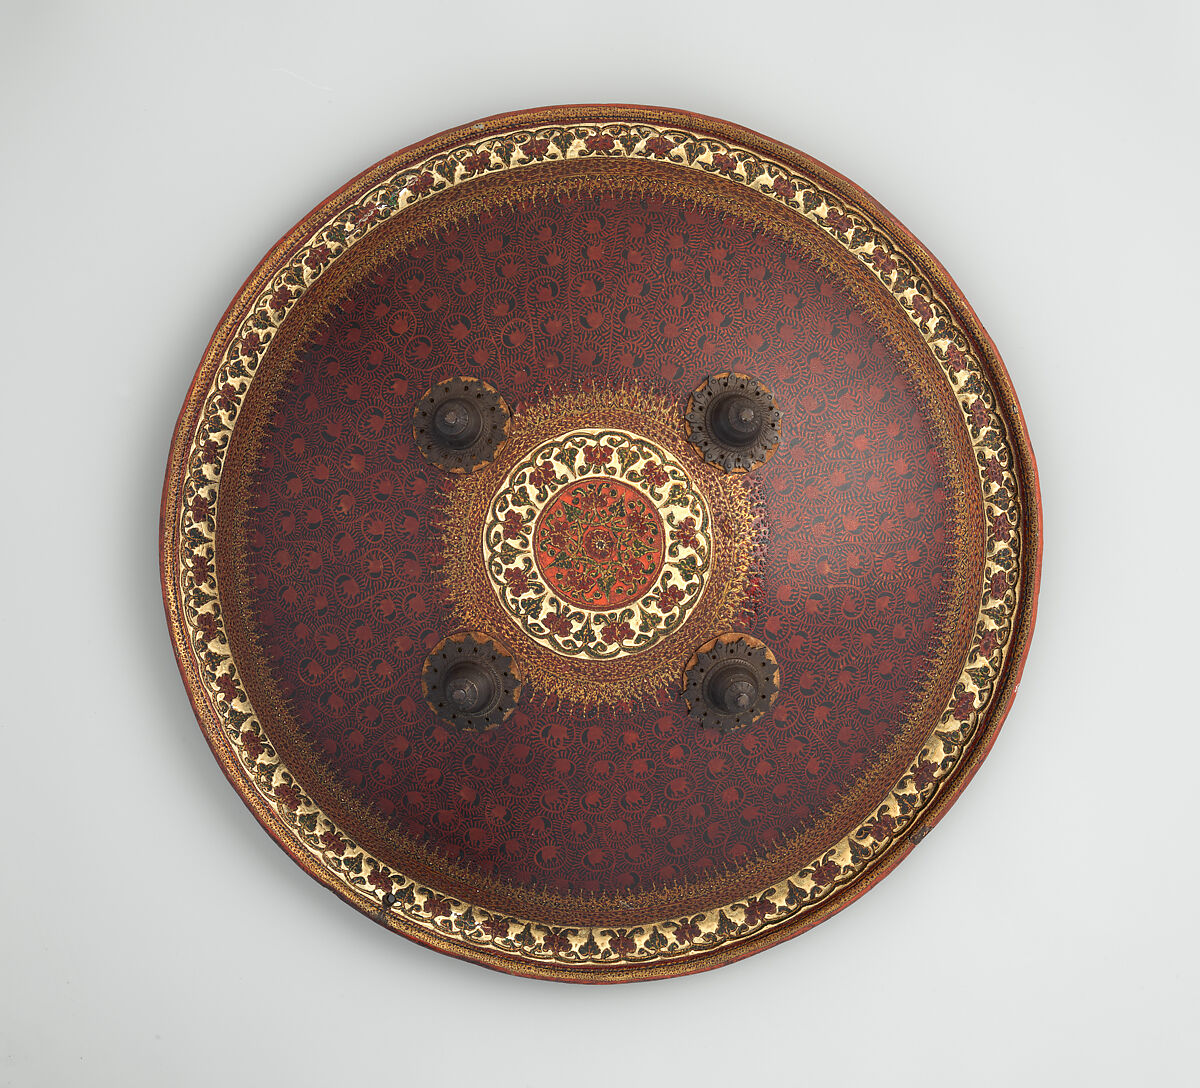 Shield (Dhál), Signed by Khooshal Dhunjee &amp; Sons (Indian, Ahmedabad, 19th century), Leather, brass, textile, pigment, Indian, Gujarat 